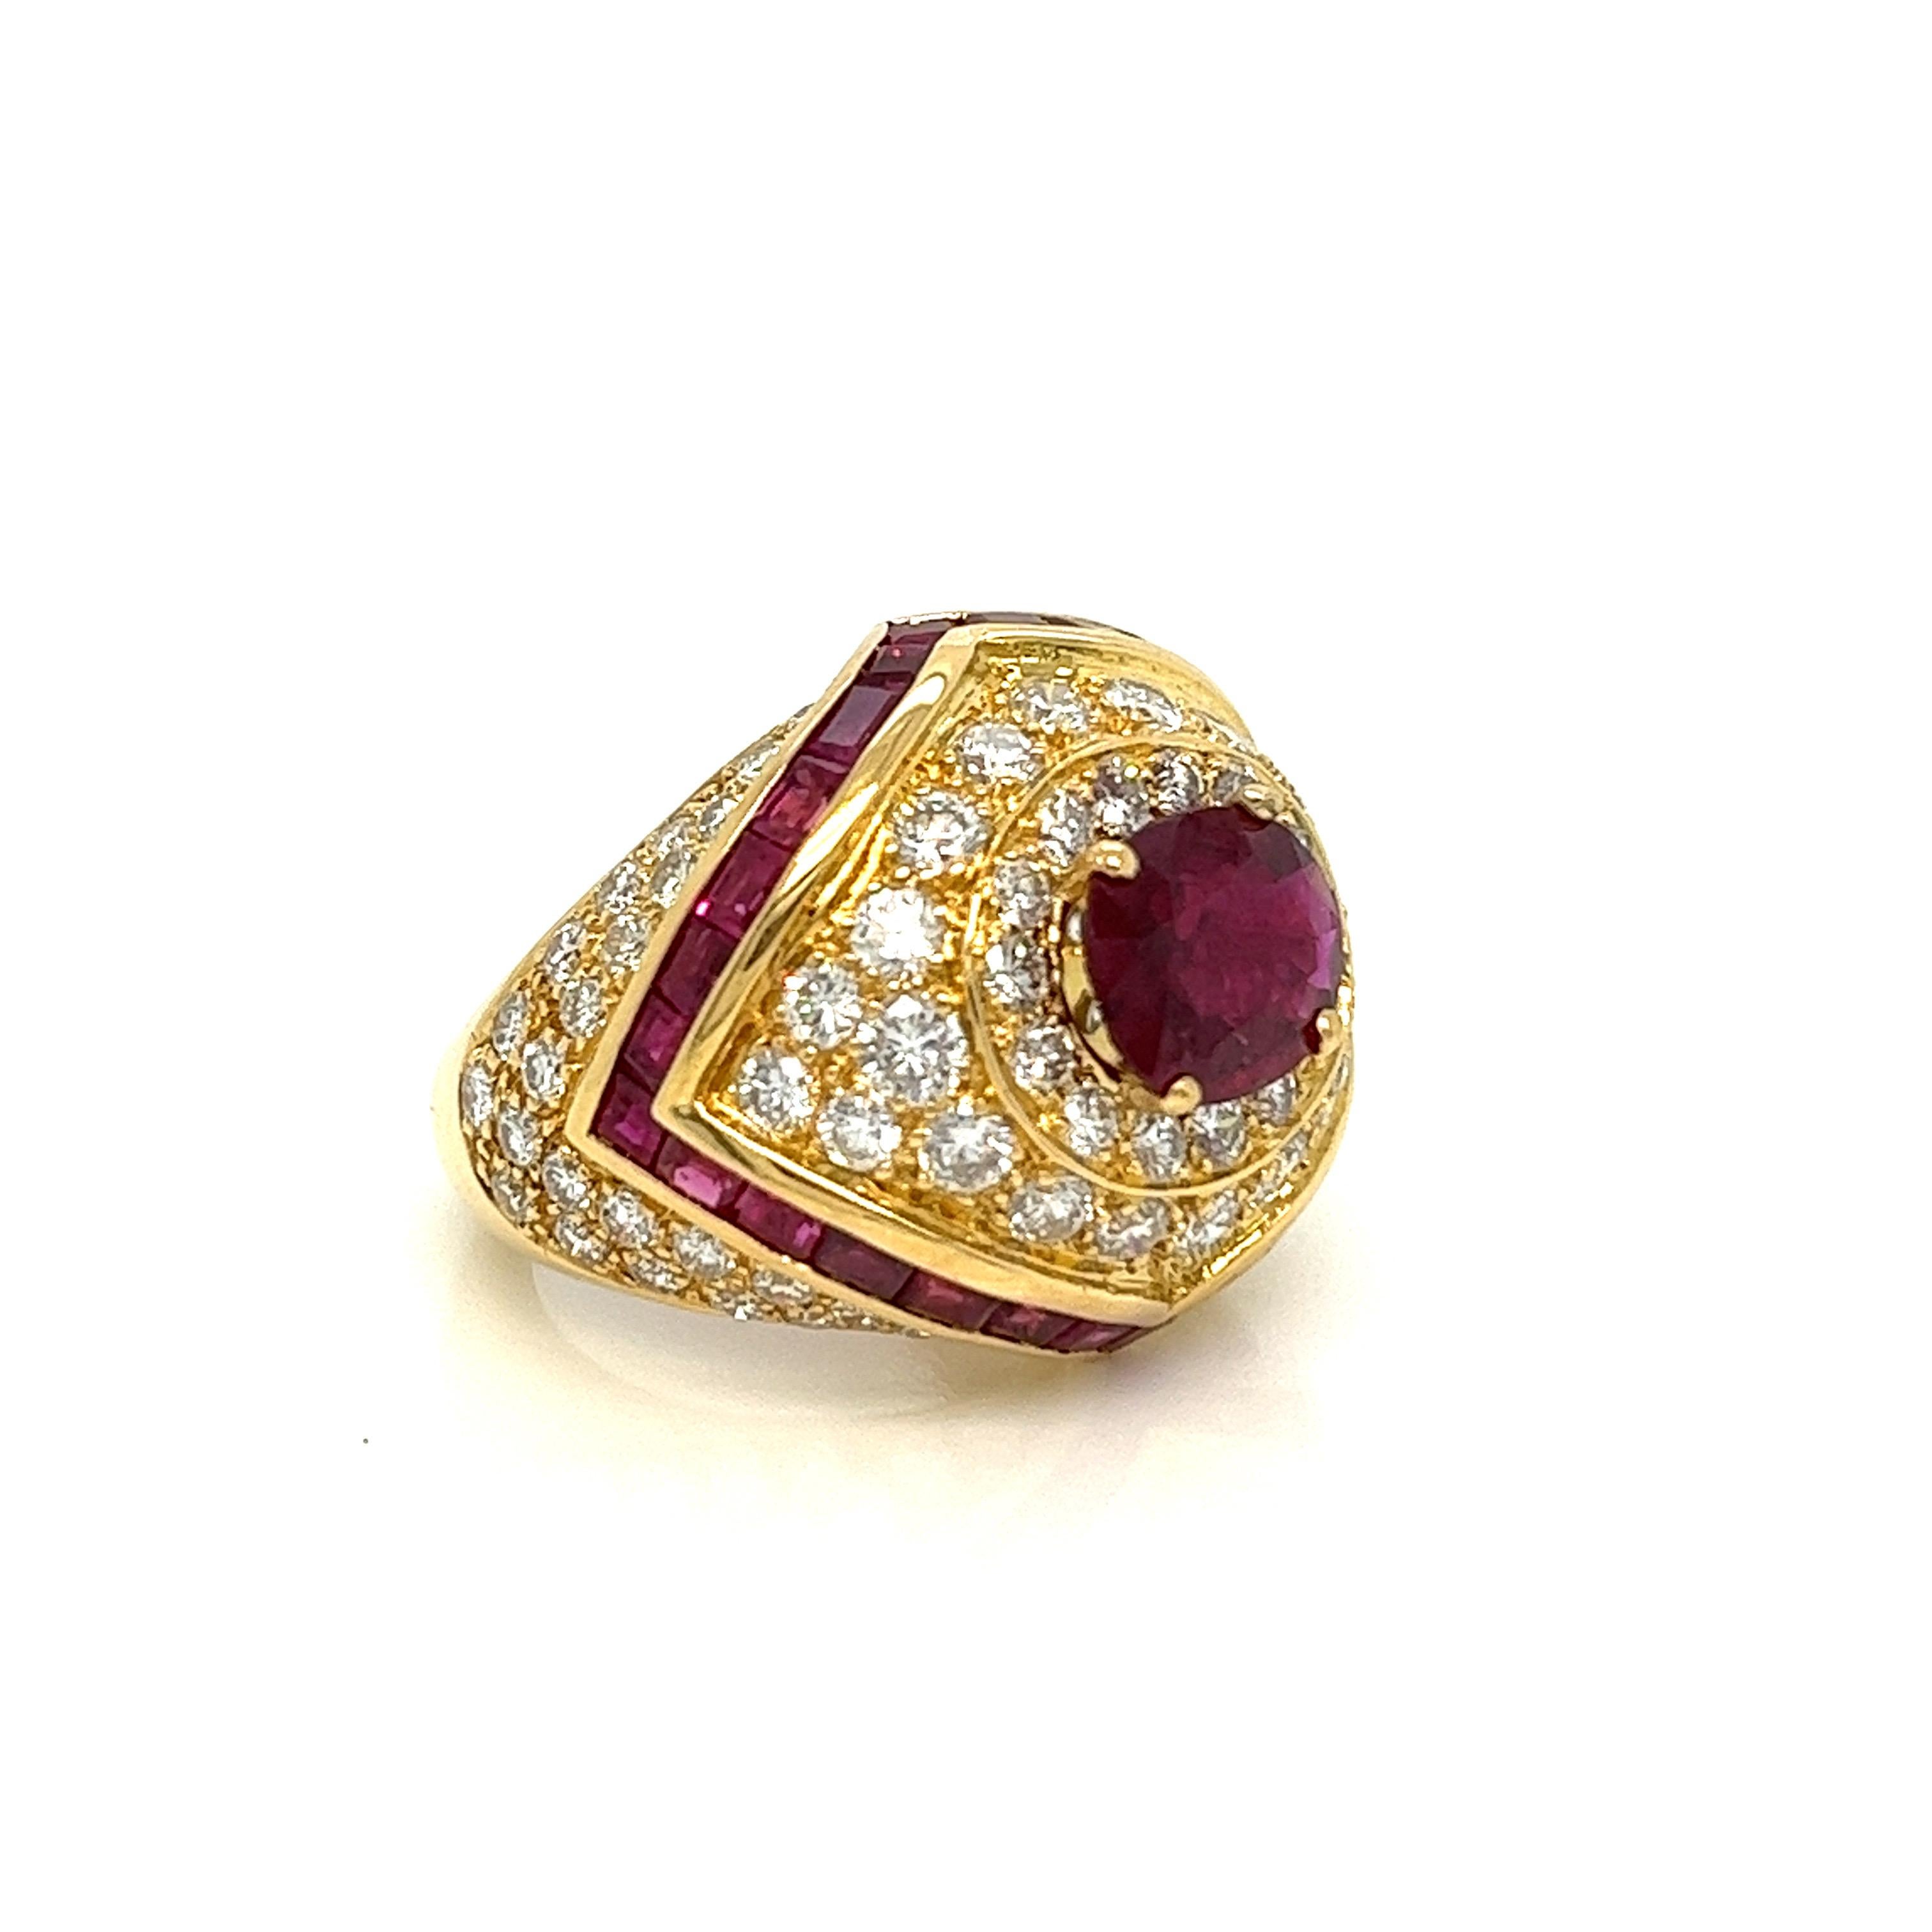 One of the most fabulous, chunky cocktail rings we’ve recently laid our eyes on! In the most gorgeous 18 karat buttery gold setting, this 2.00 ct. oval cut Thai heated ruby, certified by GIA, sits front and center. It's surrounded by inlaid round